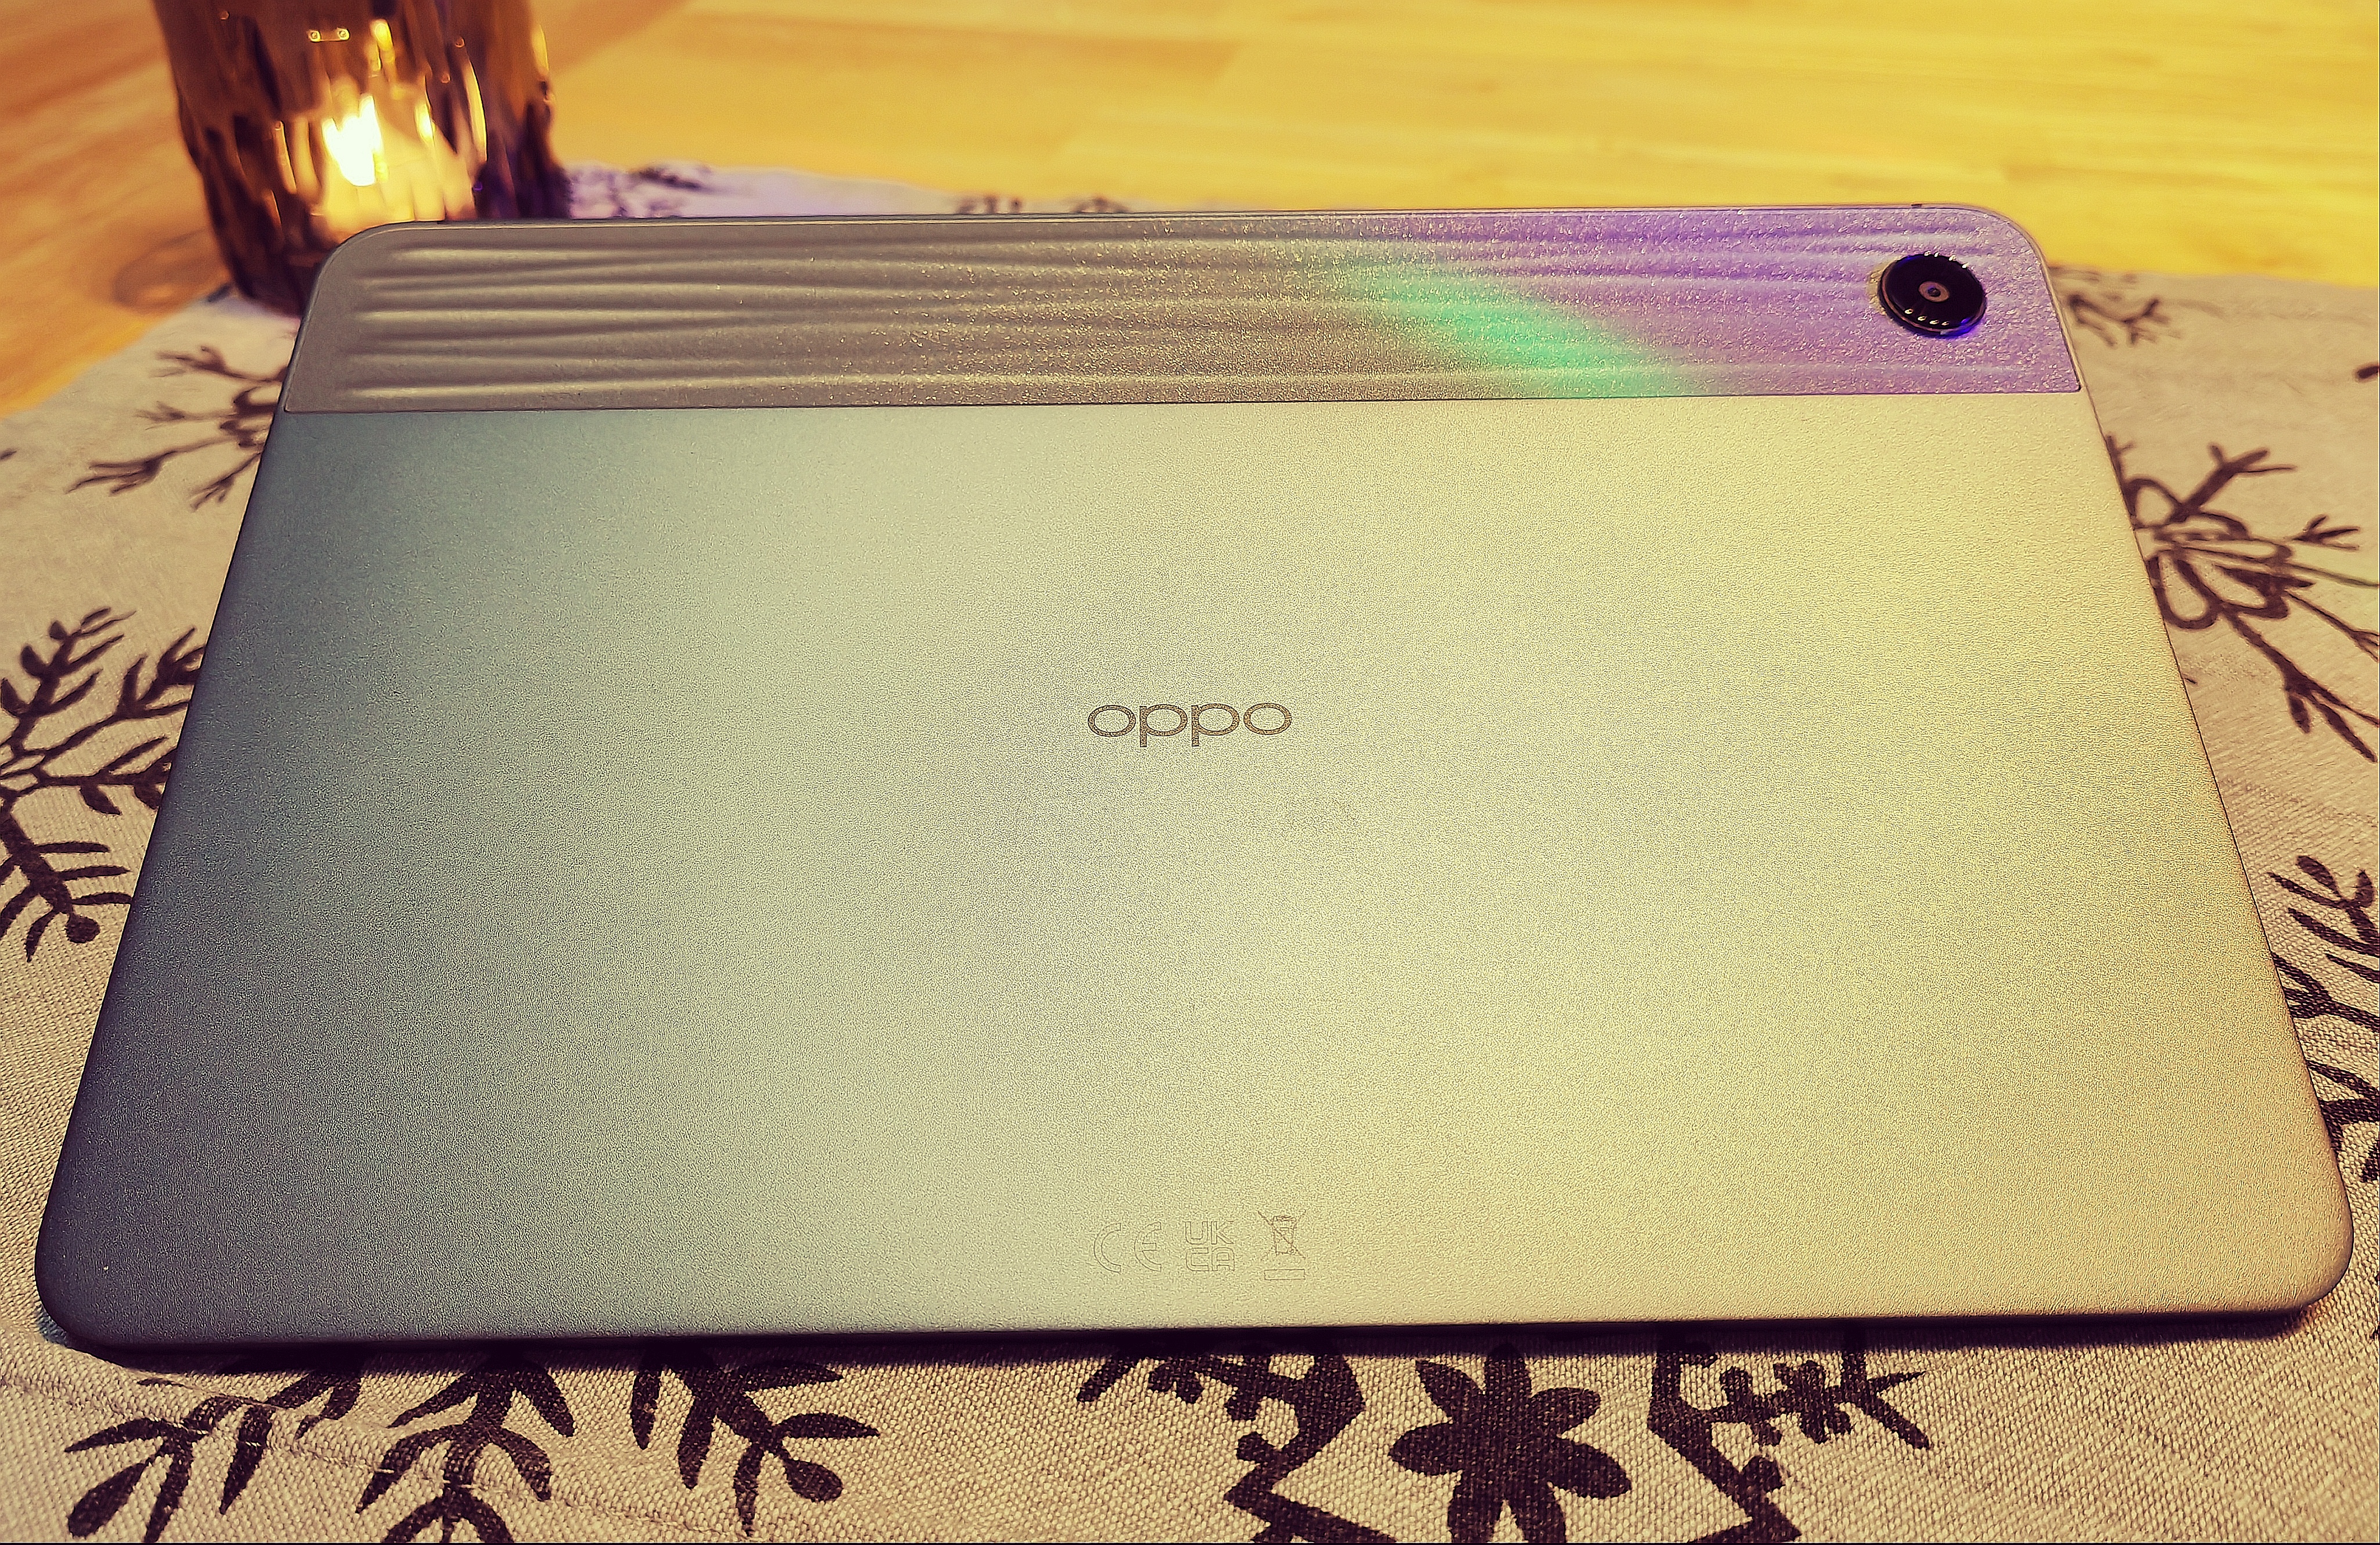 Oppo Pad 2 spotted on Geekbench: Here's what we know about the upcoming  tablet